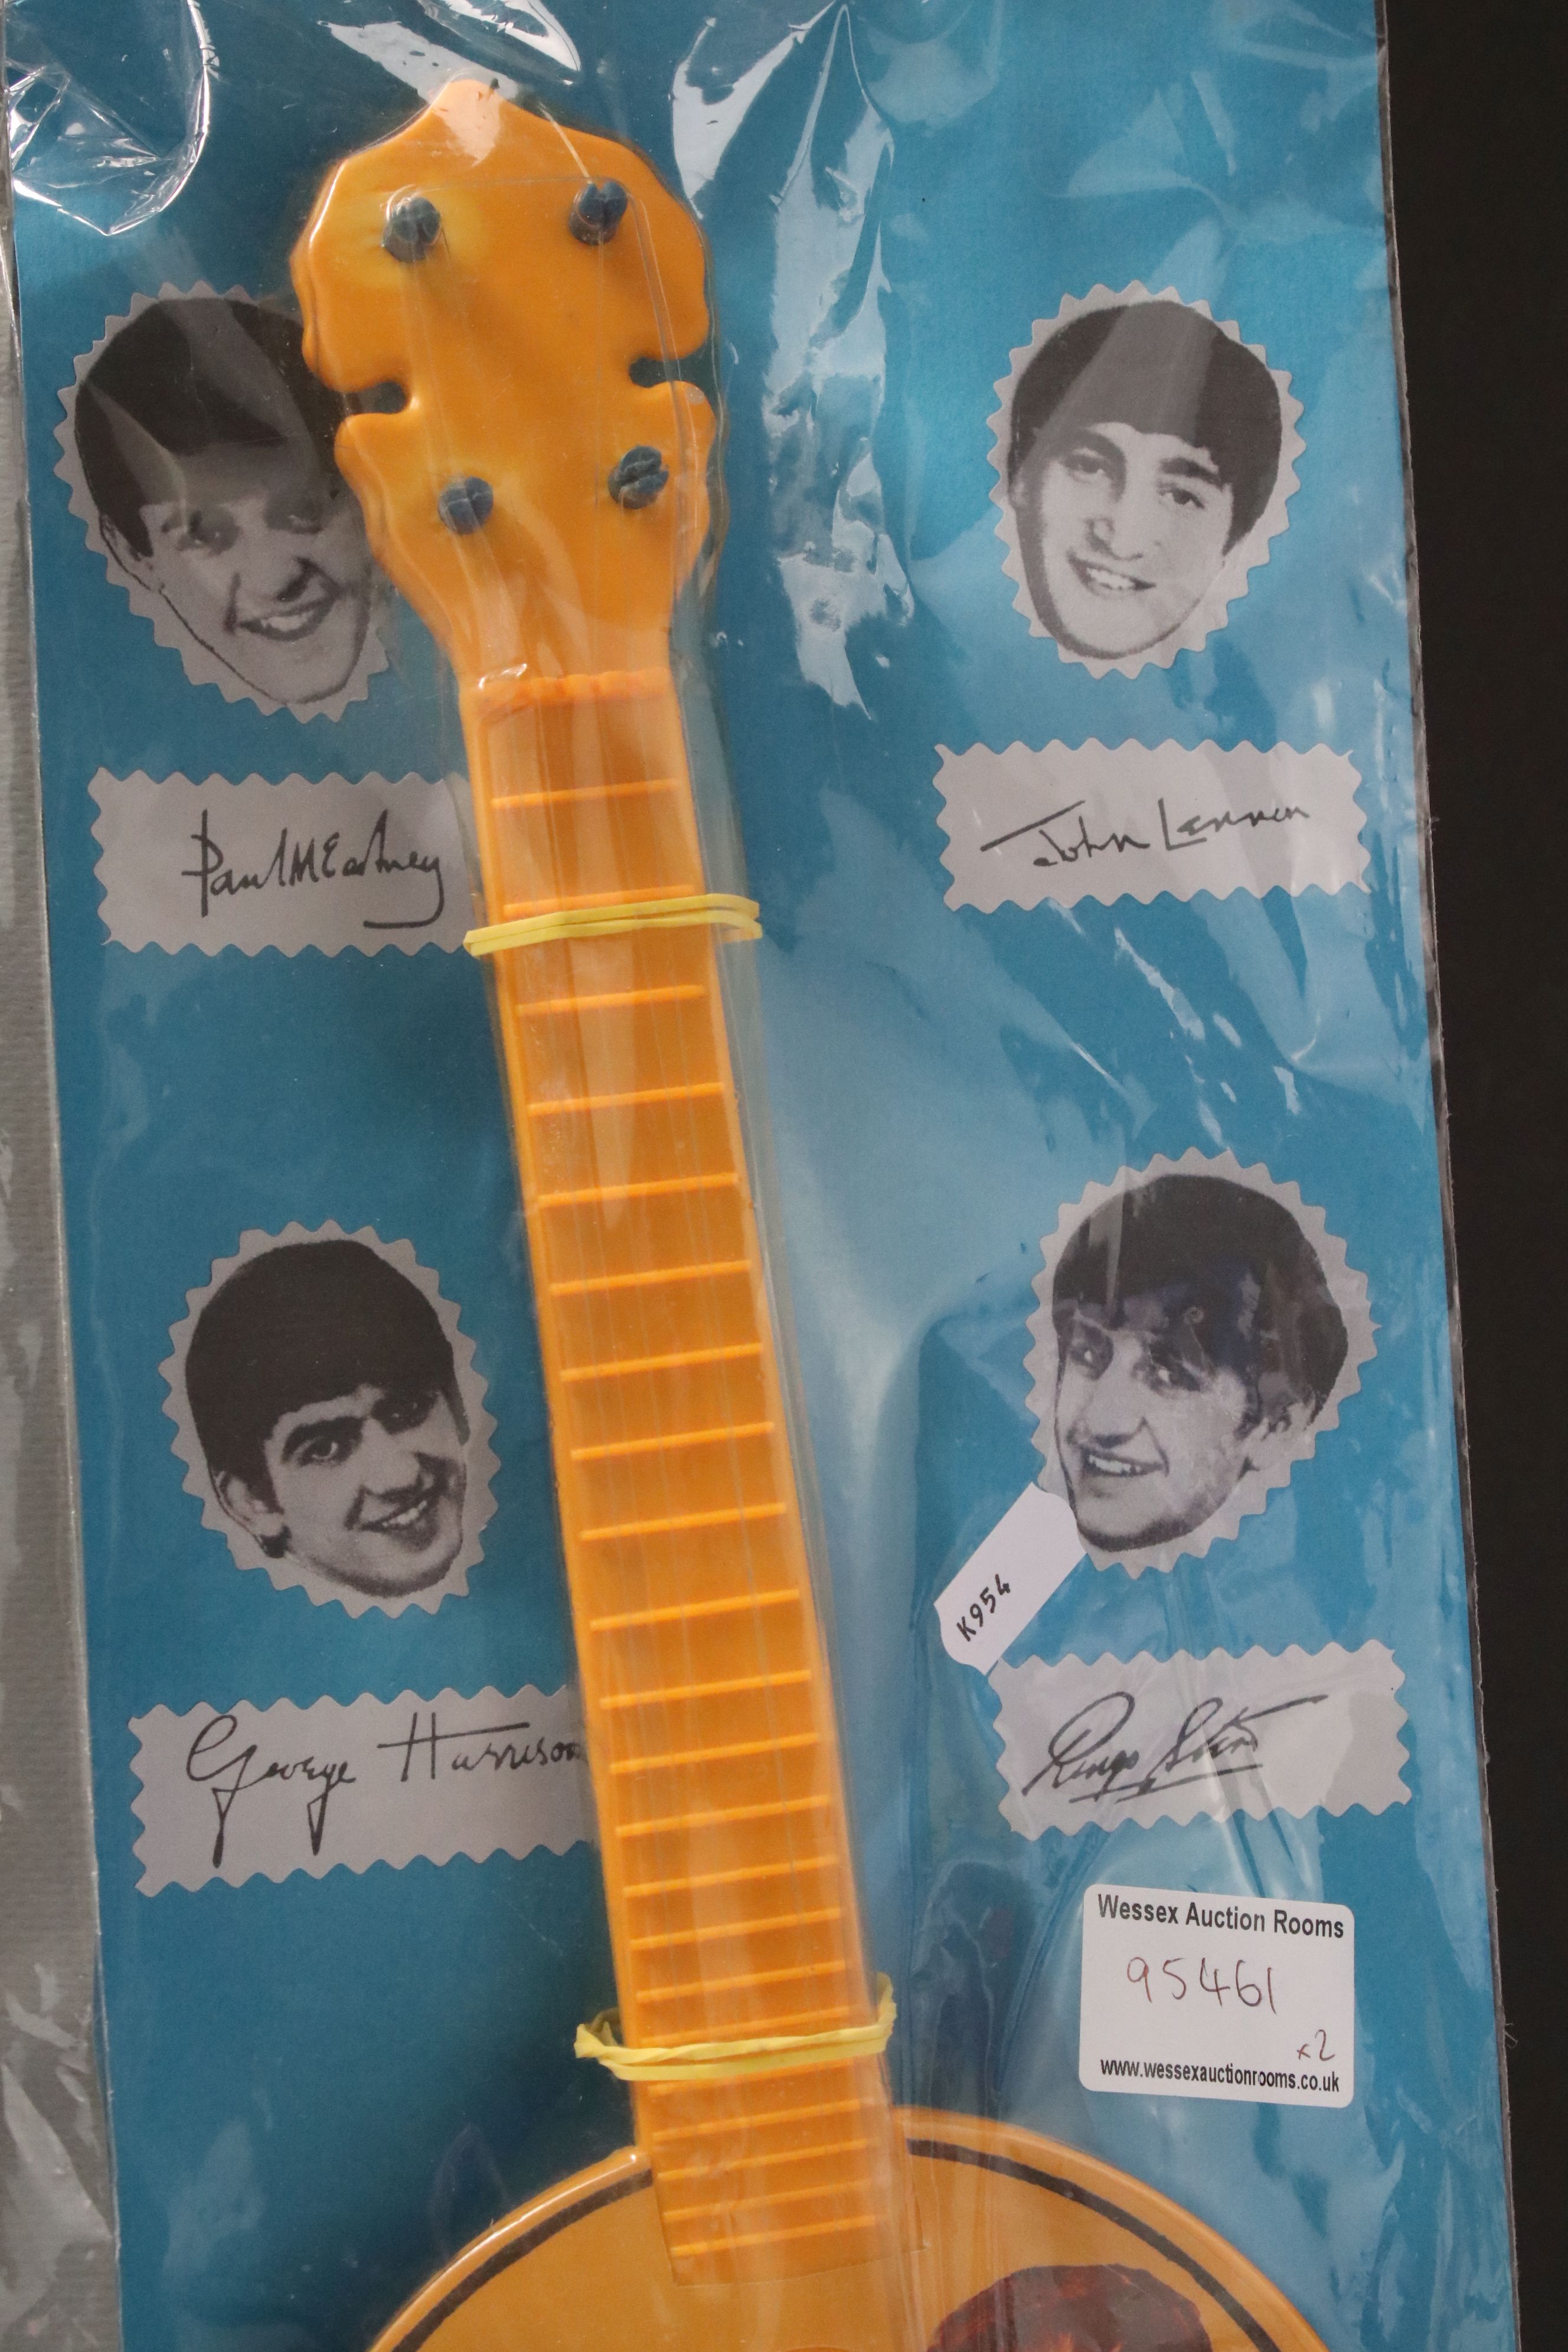 Music Toys - Two 1960s The Beatles plastic toy guitars with original cards within bags, excellent - Image 3 of 4